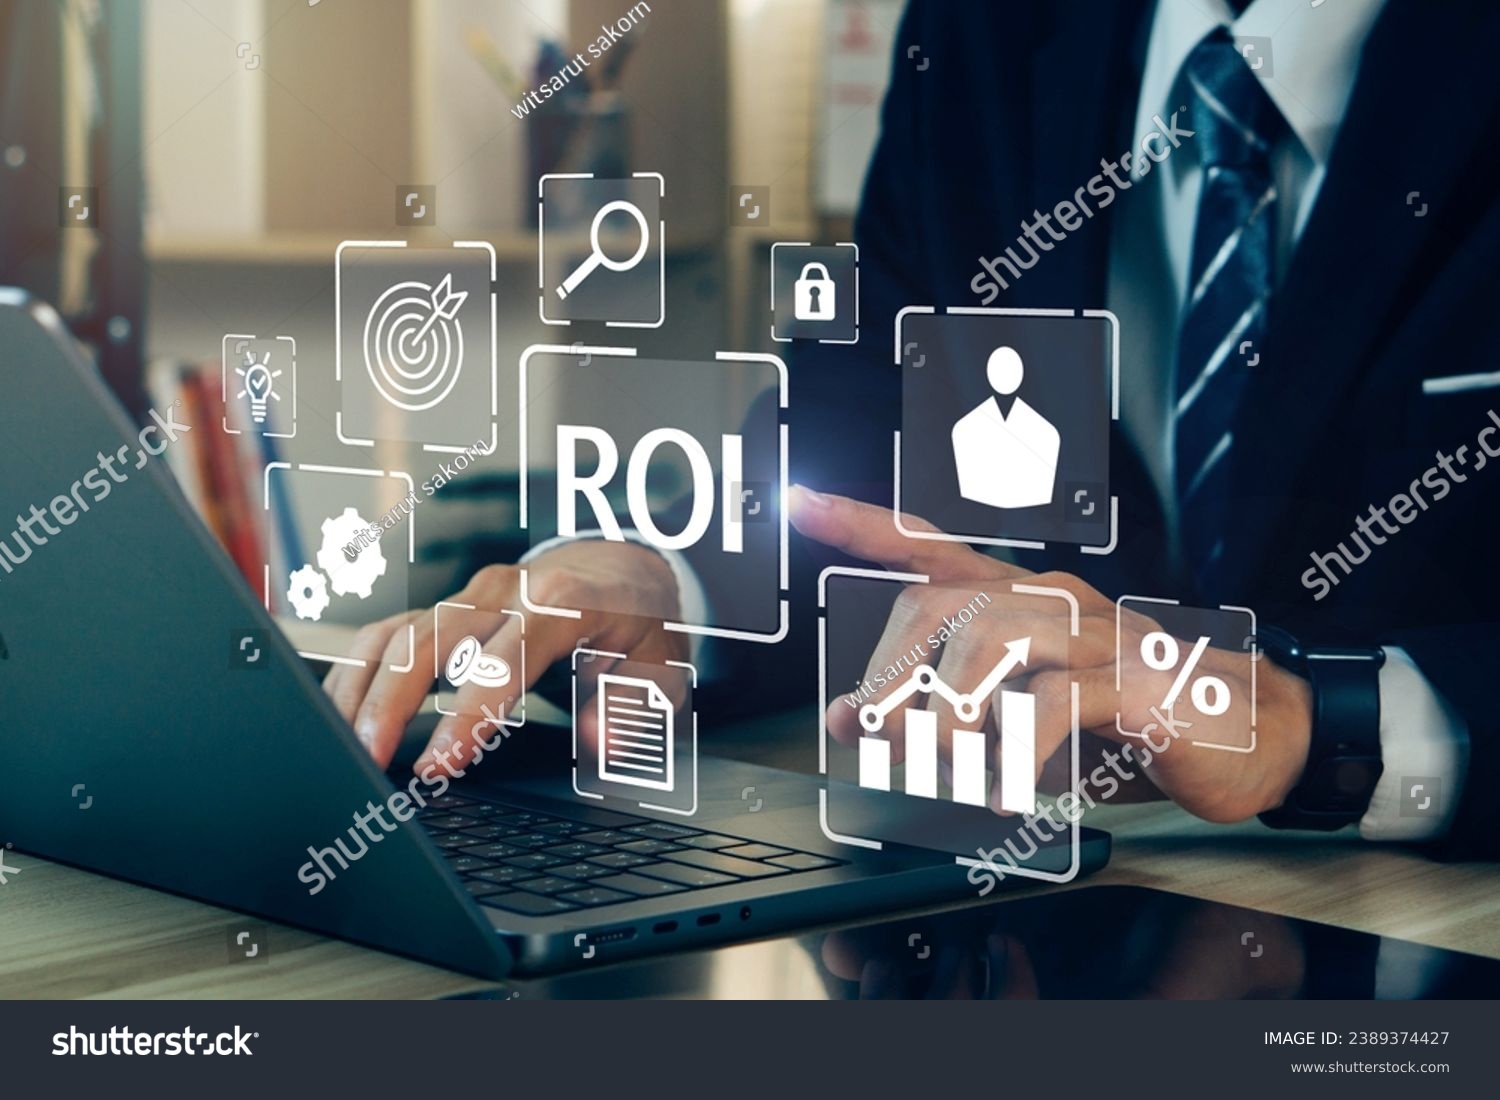 ROI,Return On Investment concept.Businessman using laptop to analysis performance measure from cost and profit efficiency.Financial growth concept. #2389374427